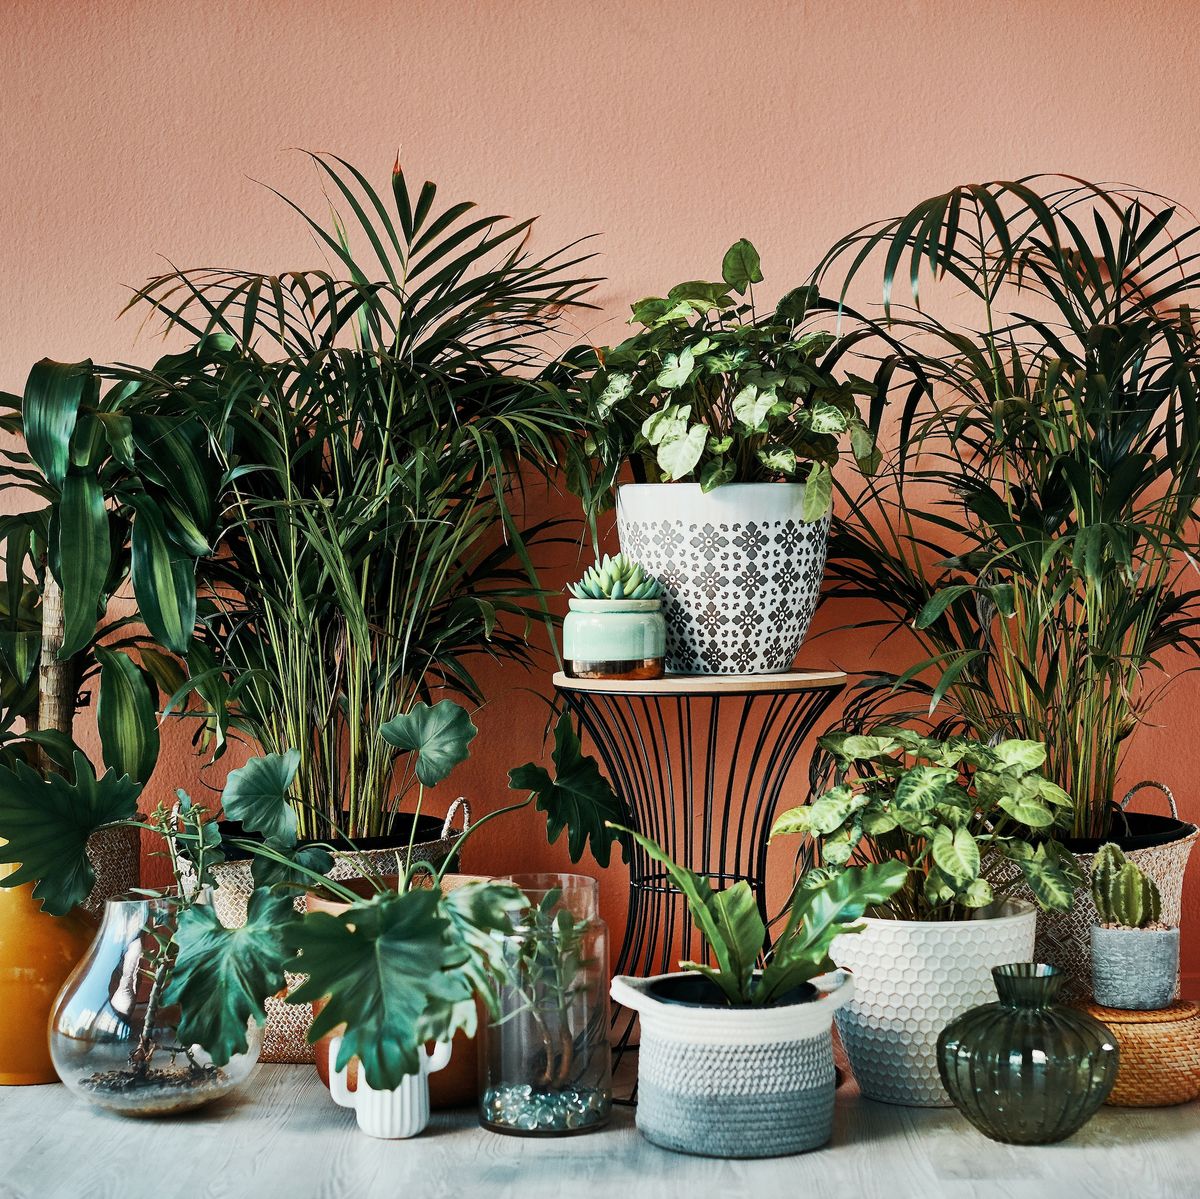 shot of plants growing in vases at home against coral wall